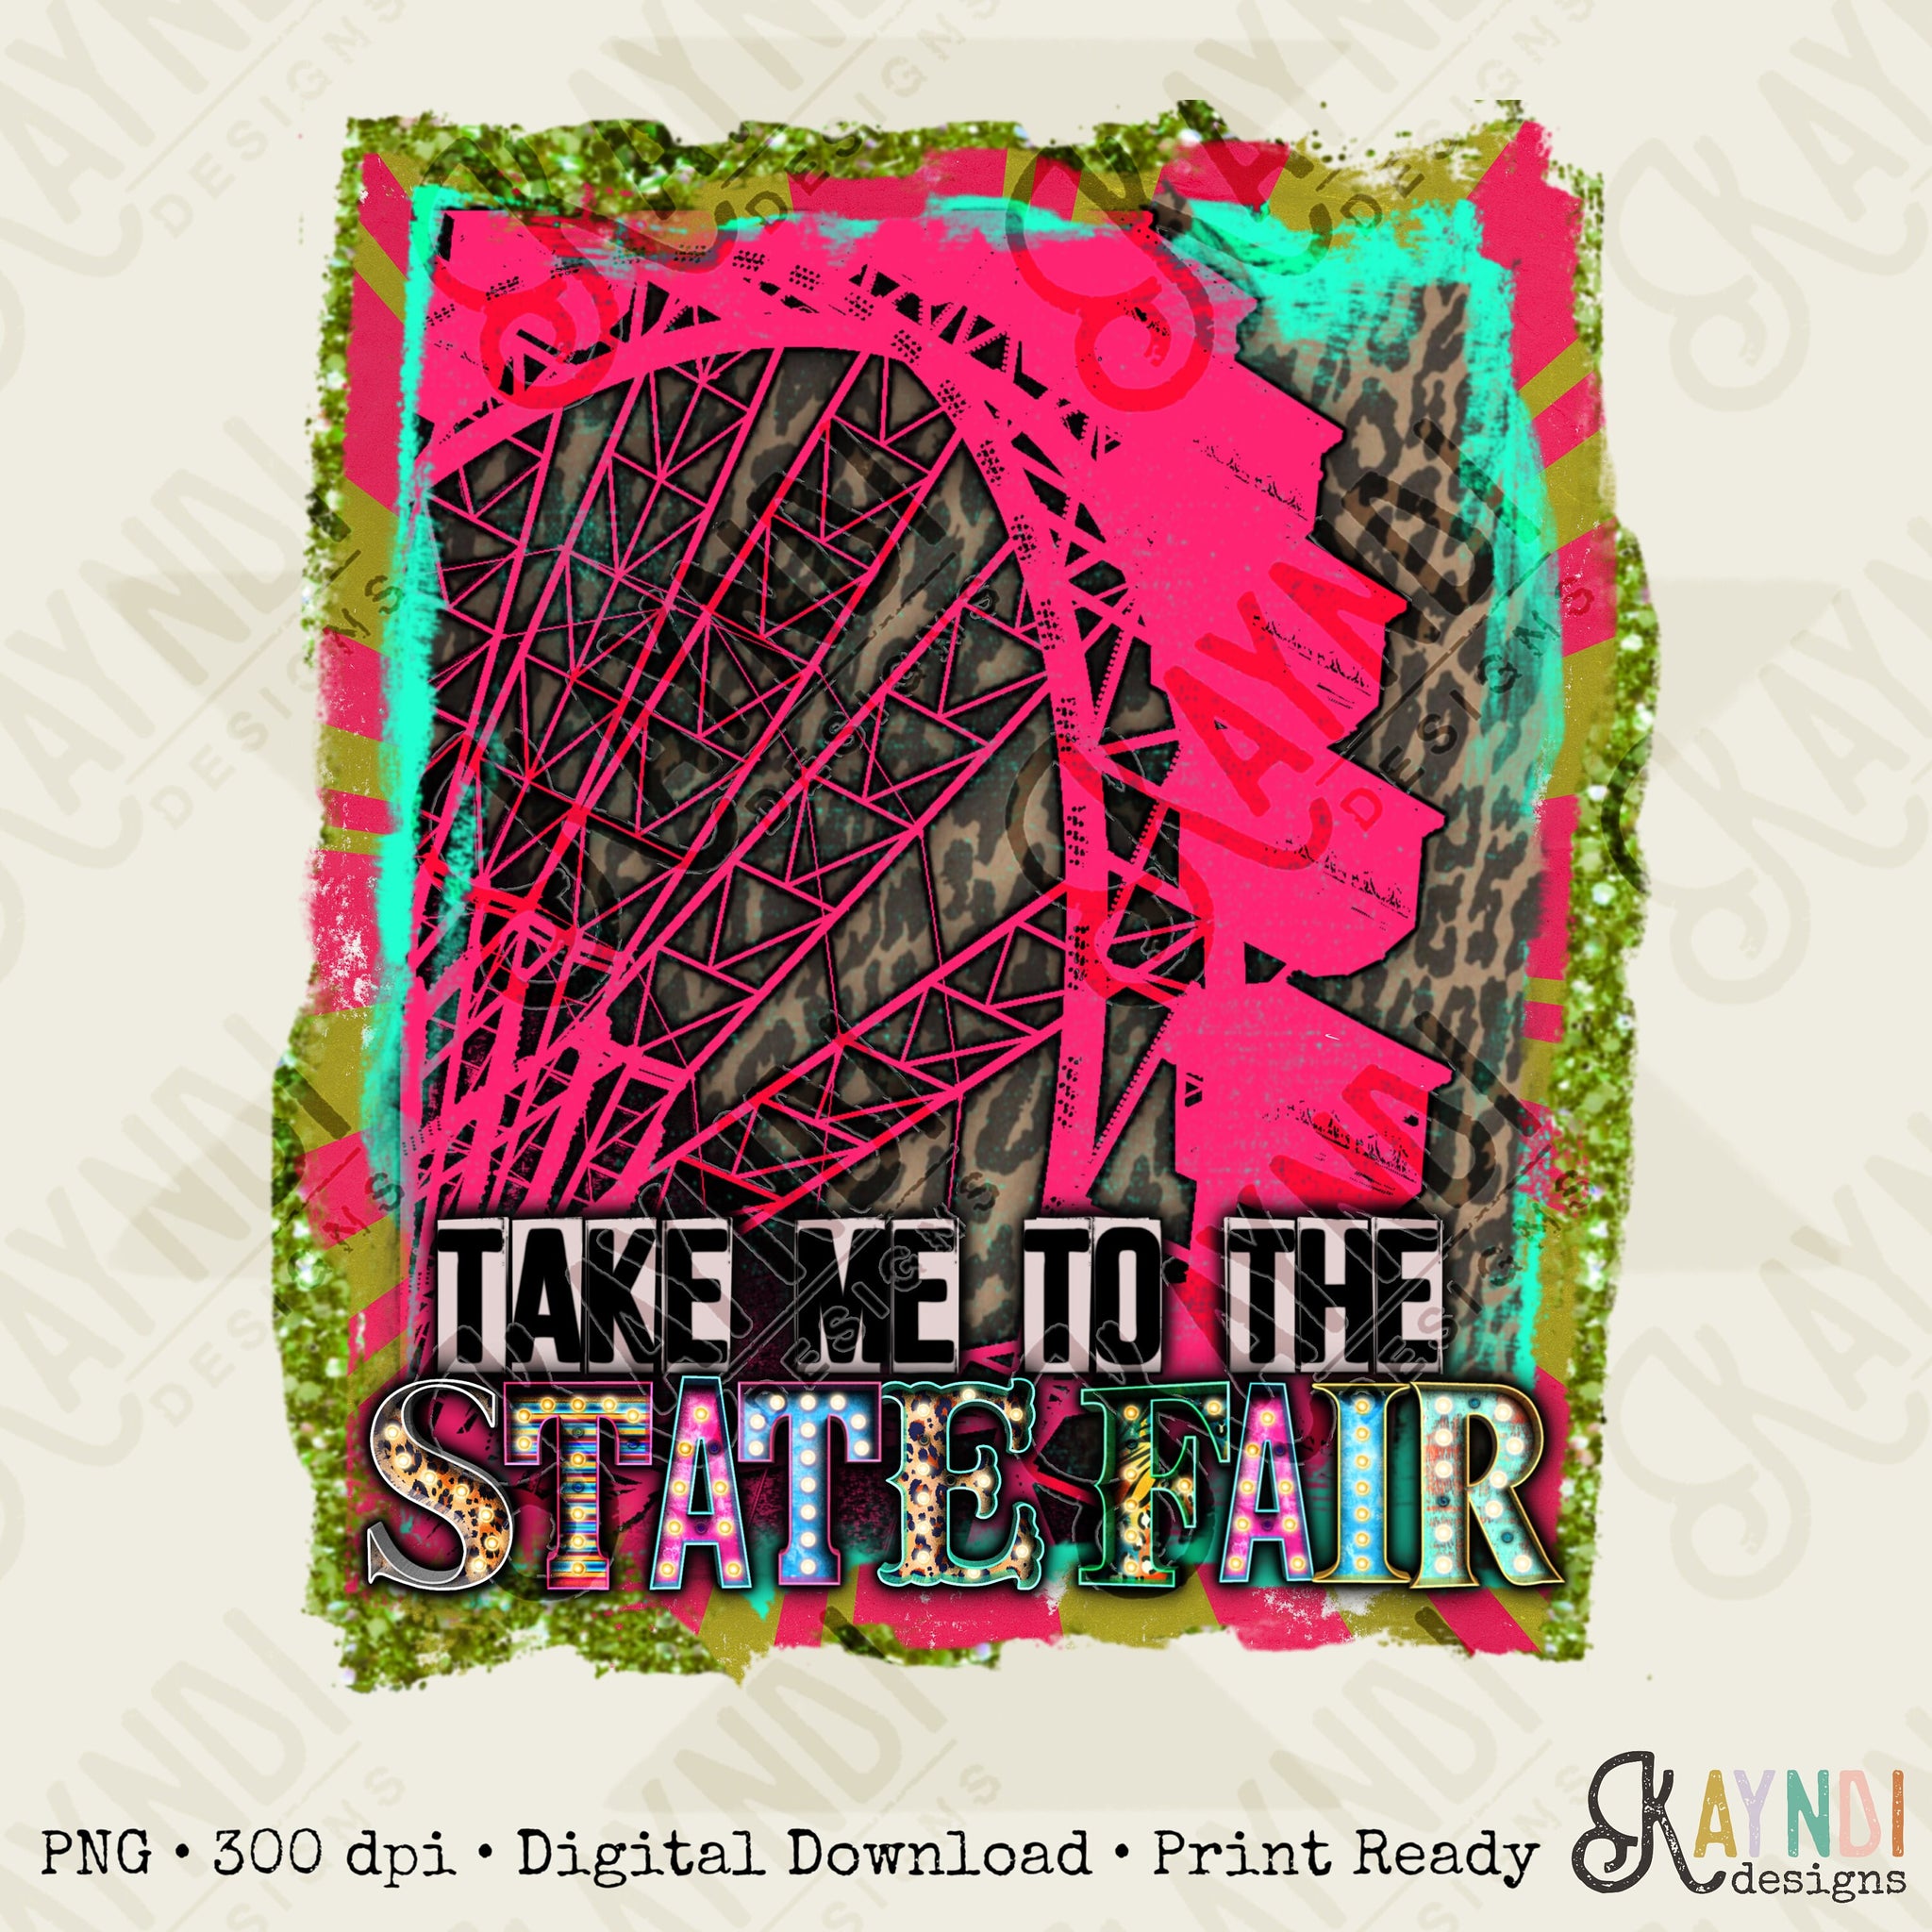 Take Me to the State Fair Sublimation Design PNG Digital Download Printable Ferris Wheel Marquee Leopard Glitter Fall Southern Country